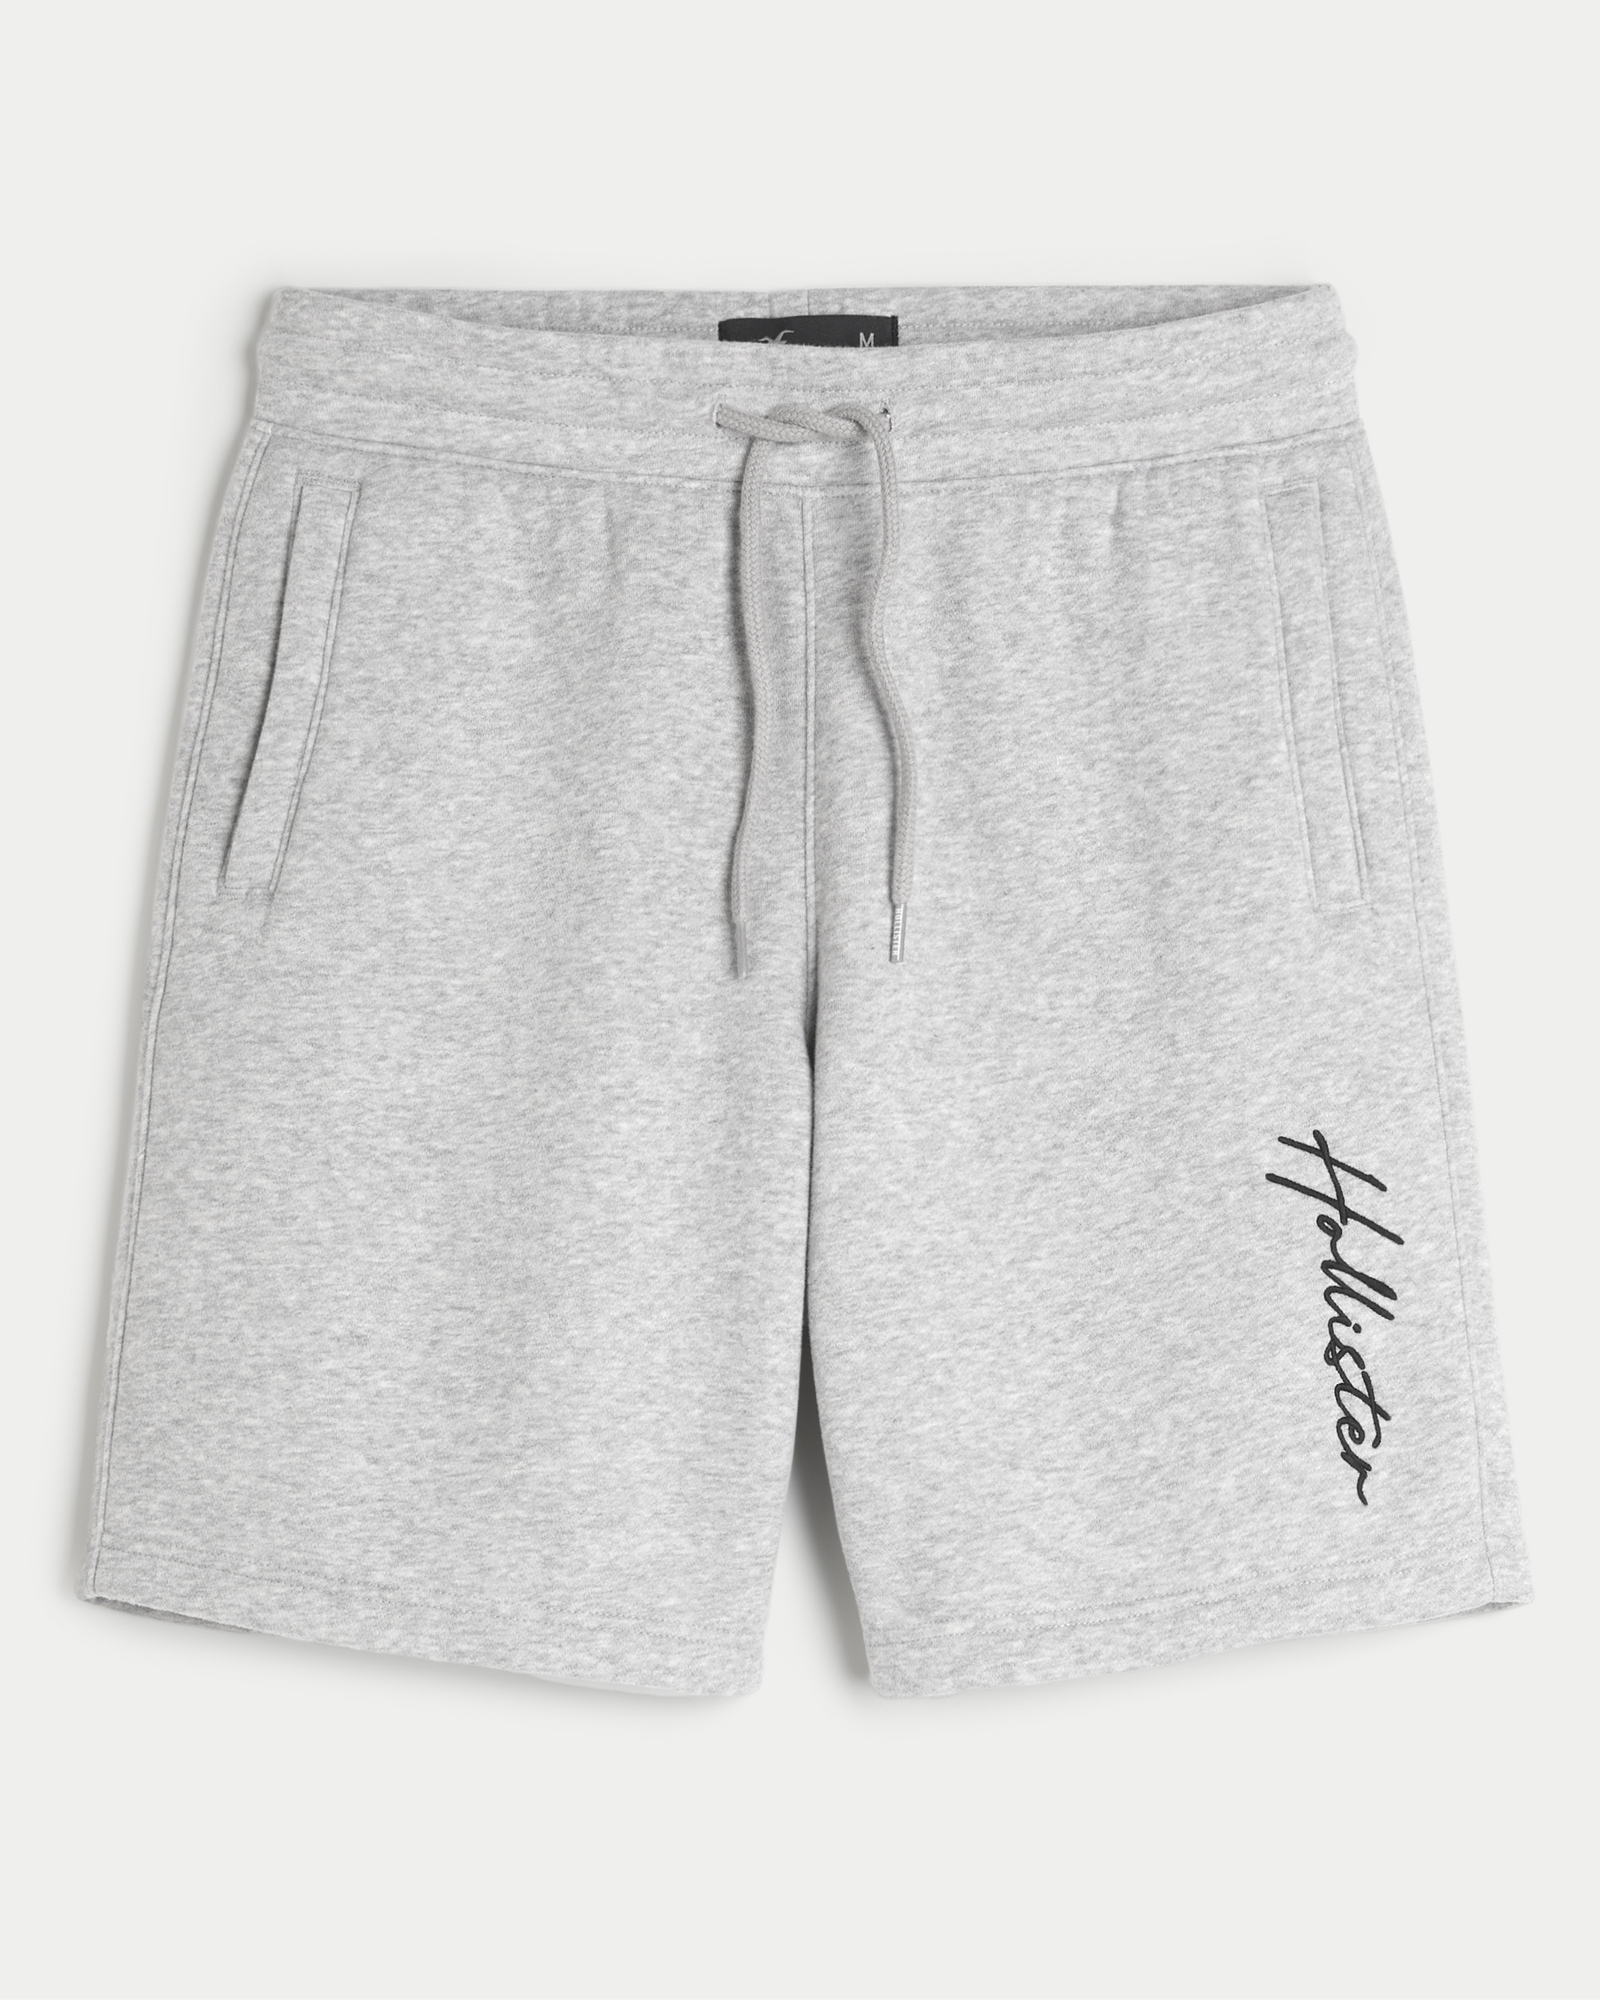 https://img.hollisterco.com/is/image/anf/KIC_328-4037-0029-122_prod1.jpg?policy=product-extra-large